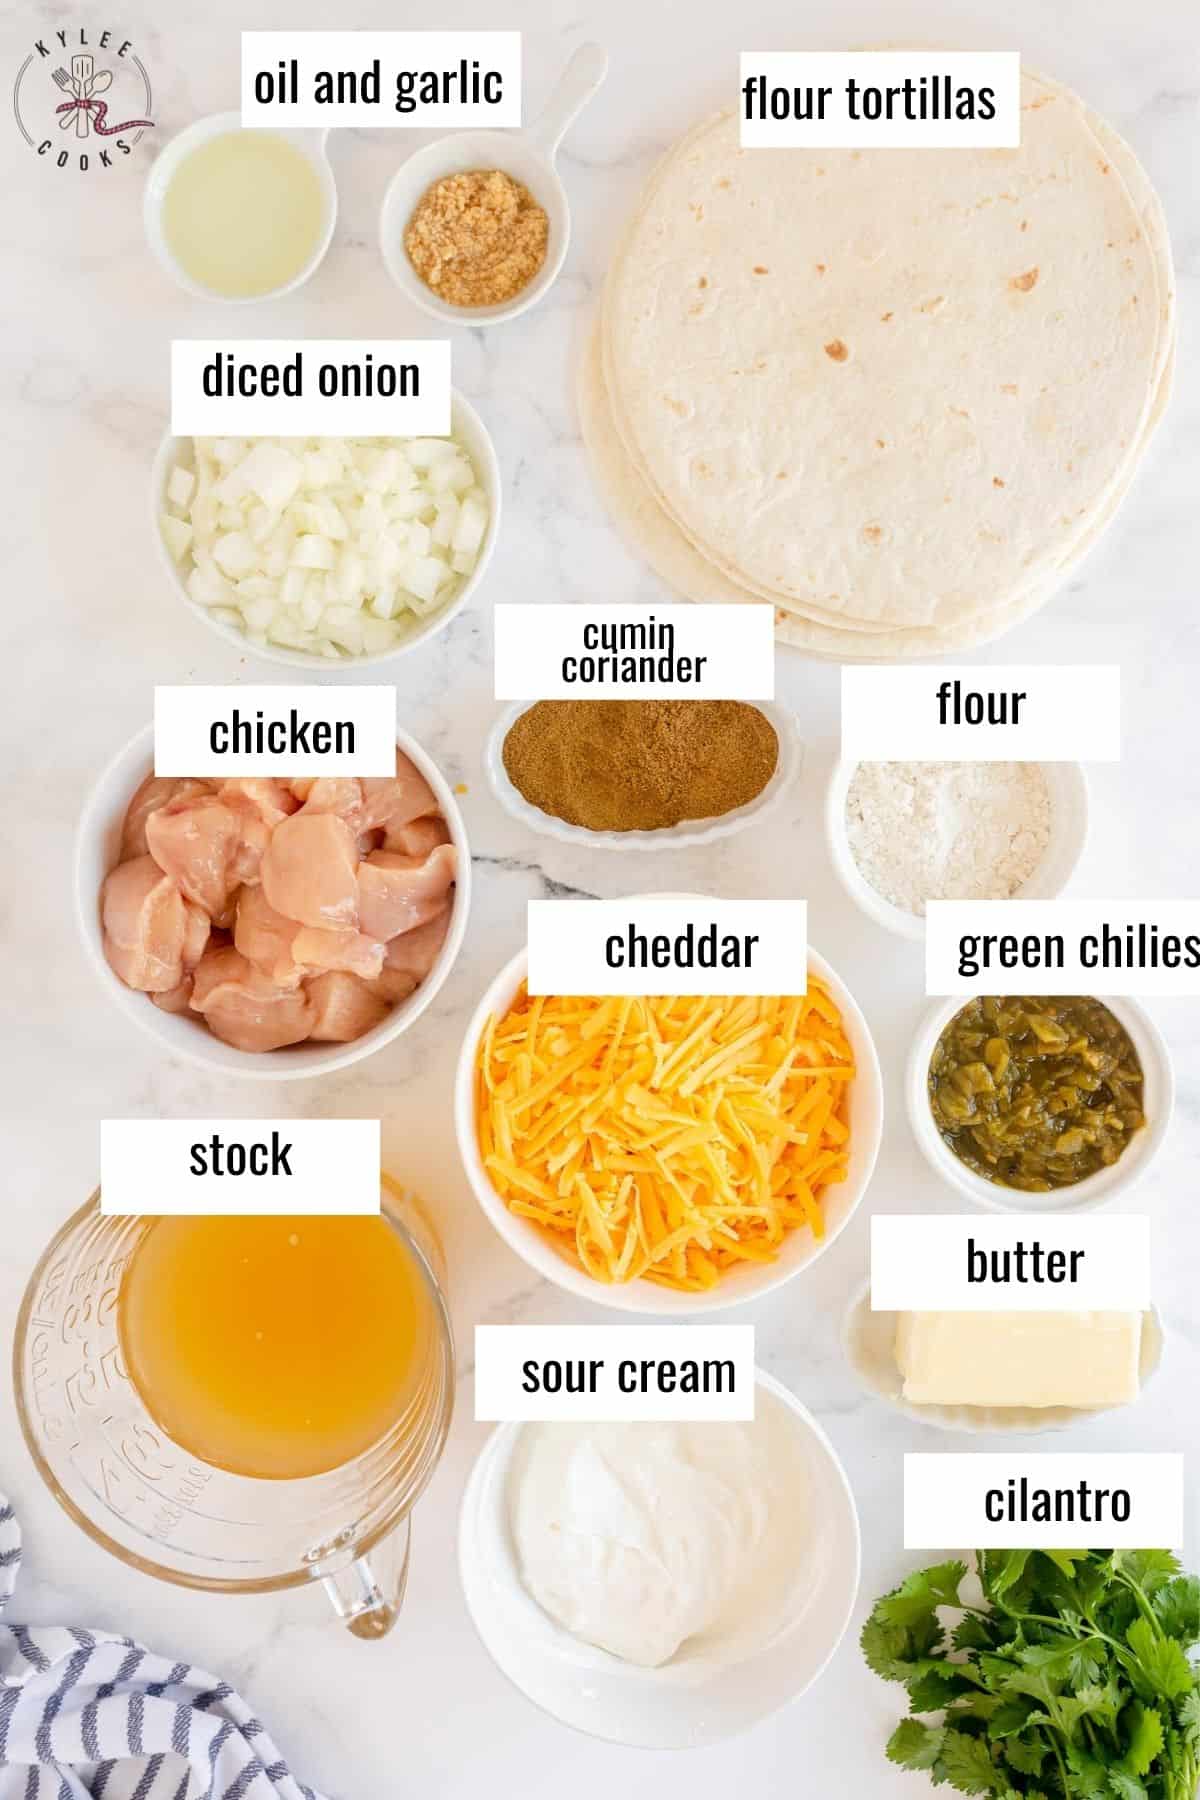 ingredients to make chicken enchiladas laid out and labeled